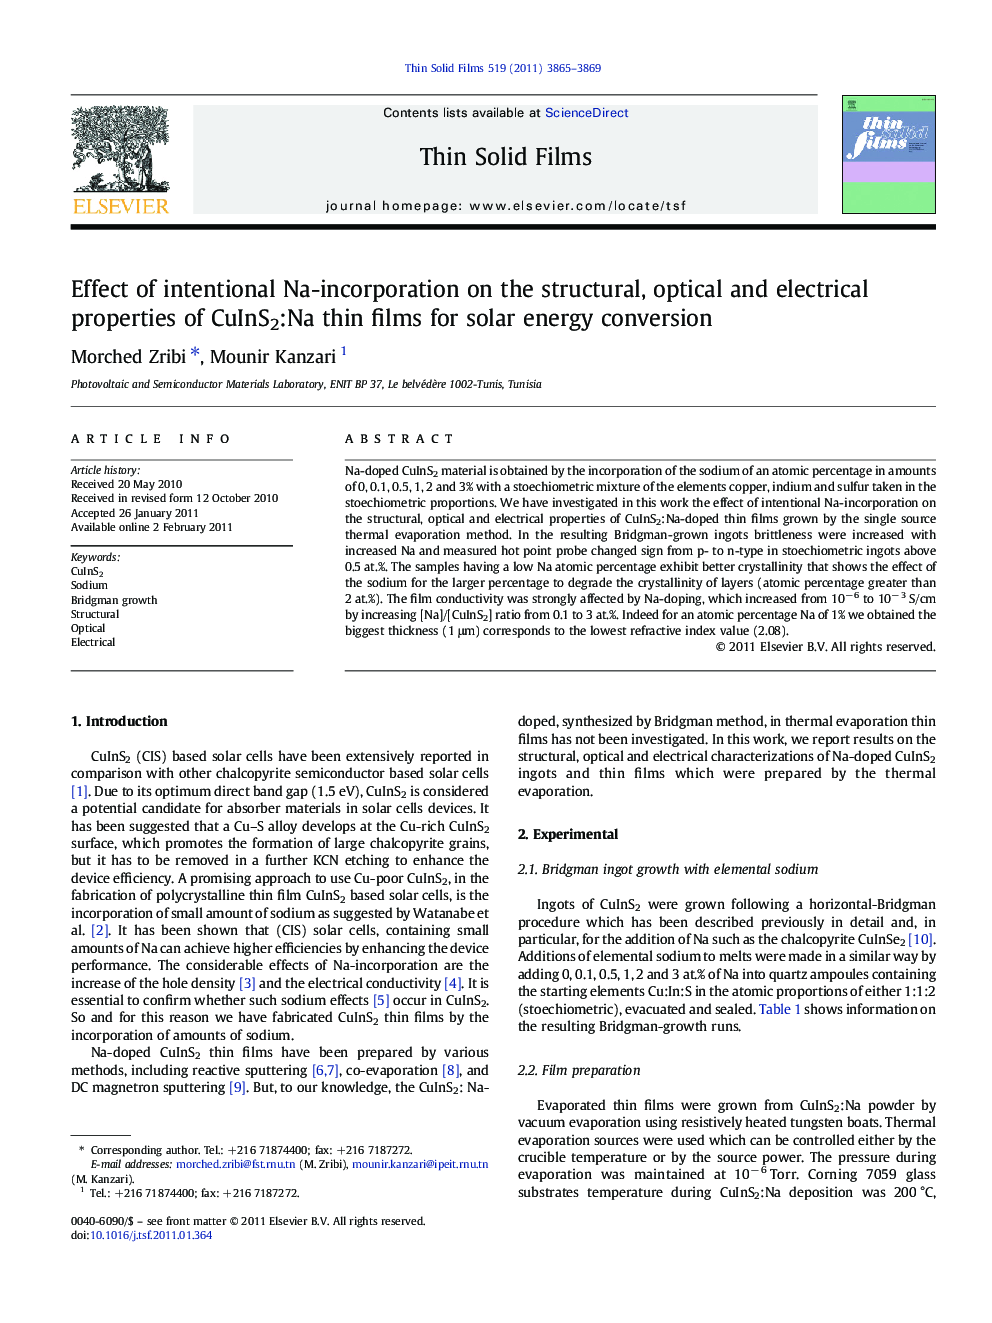 Effect of intentional Na-incorporation on the structural, optical and electrical properties of CuInS2:Na thin films for solar energy conversion